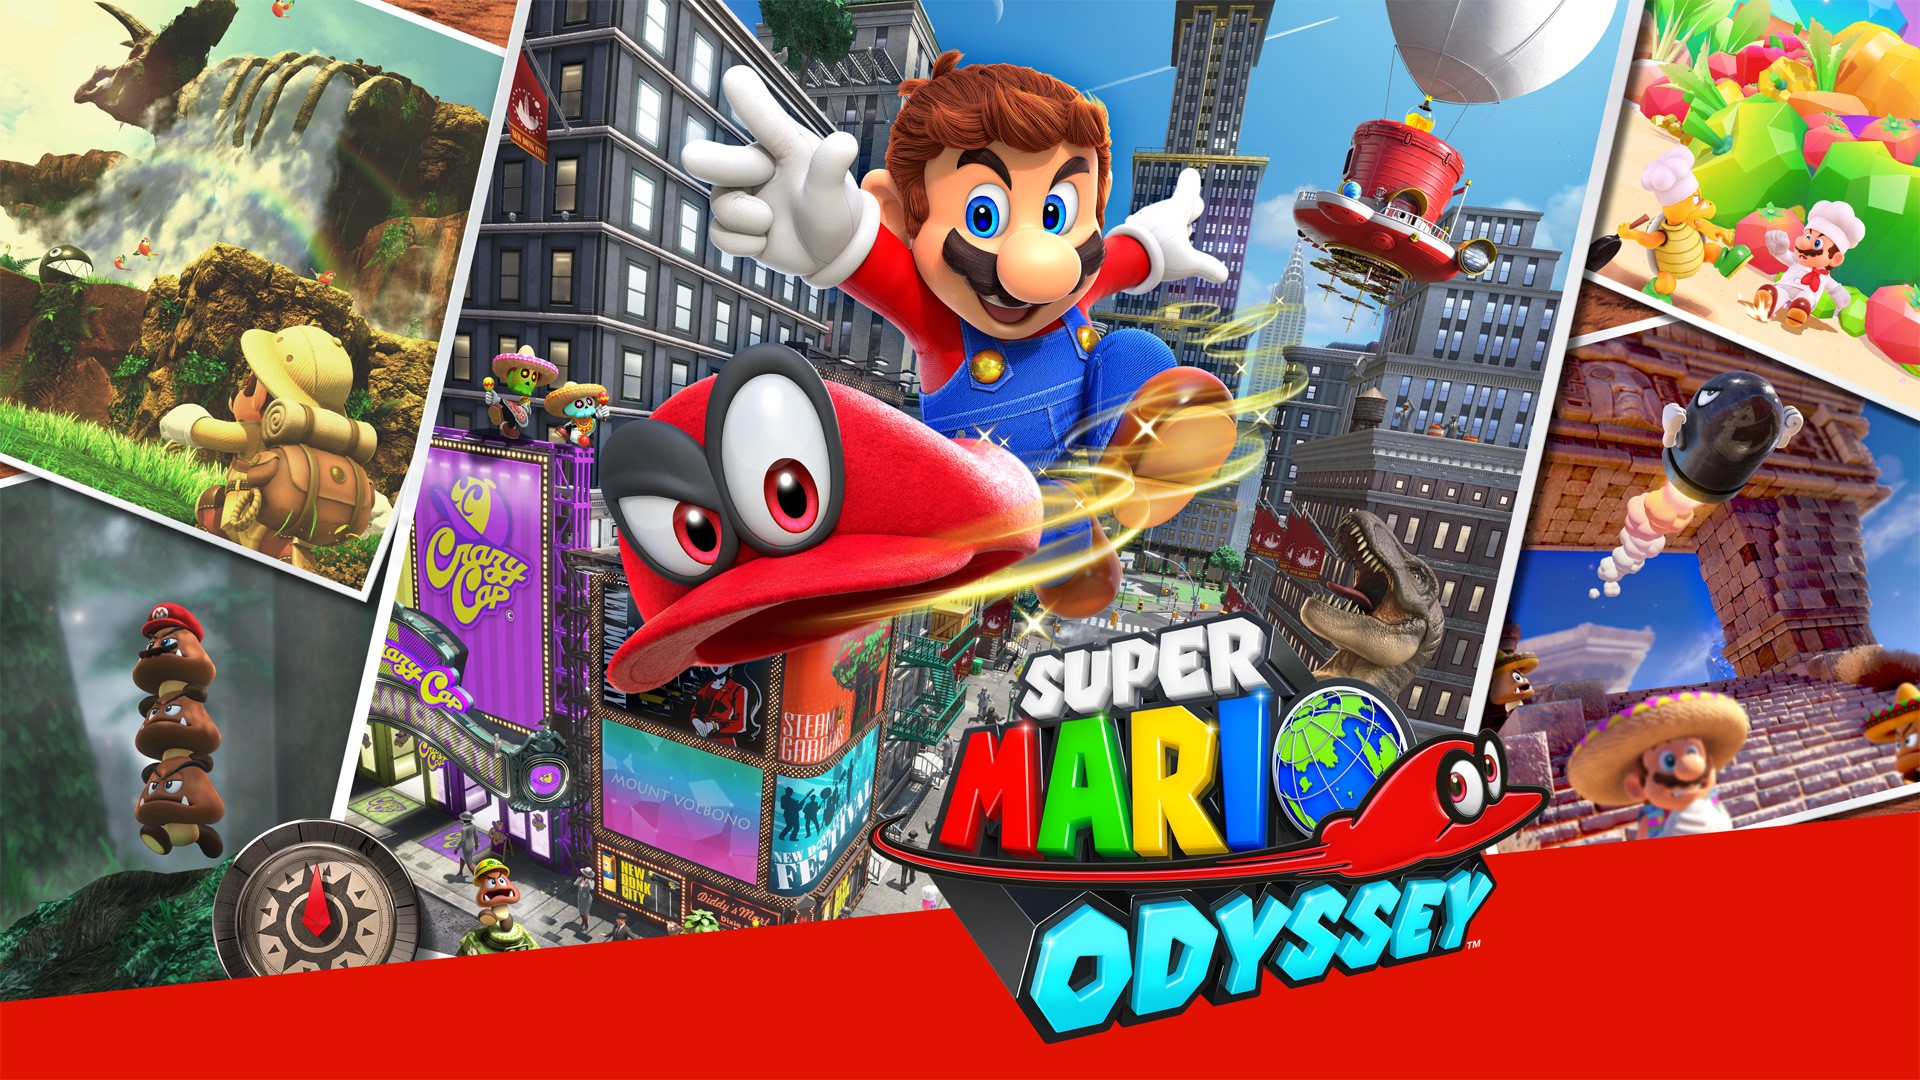 Super Mario Odyssey 2: information may have leaked before the official announcement